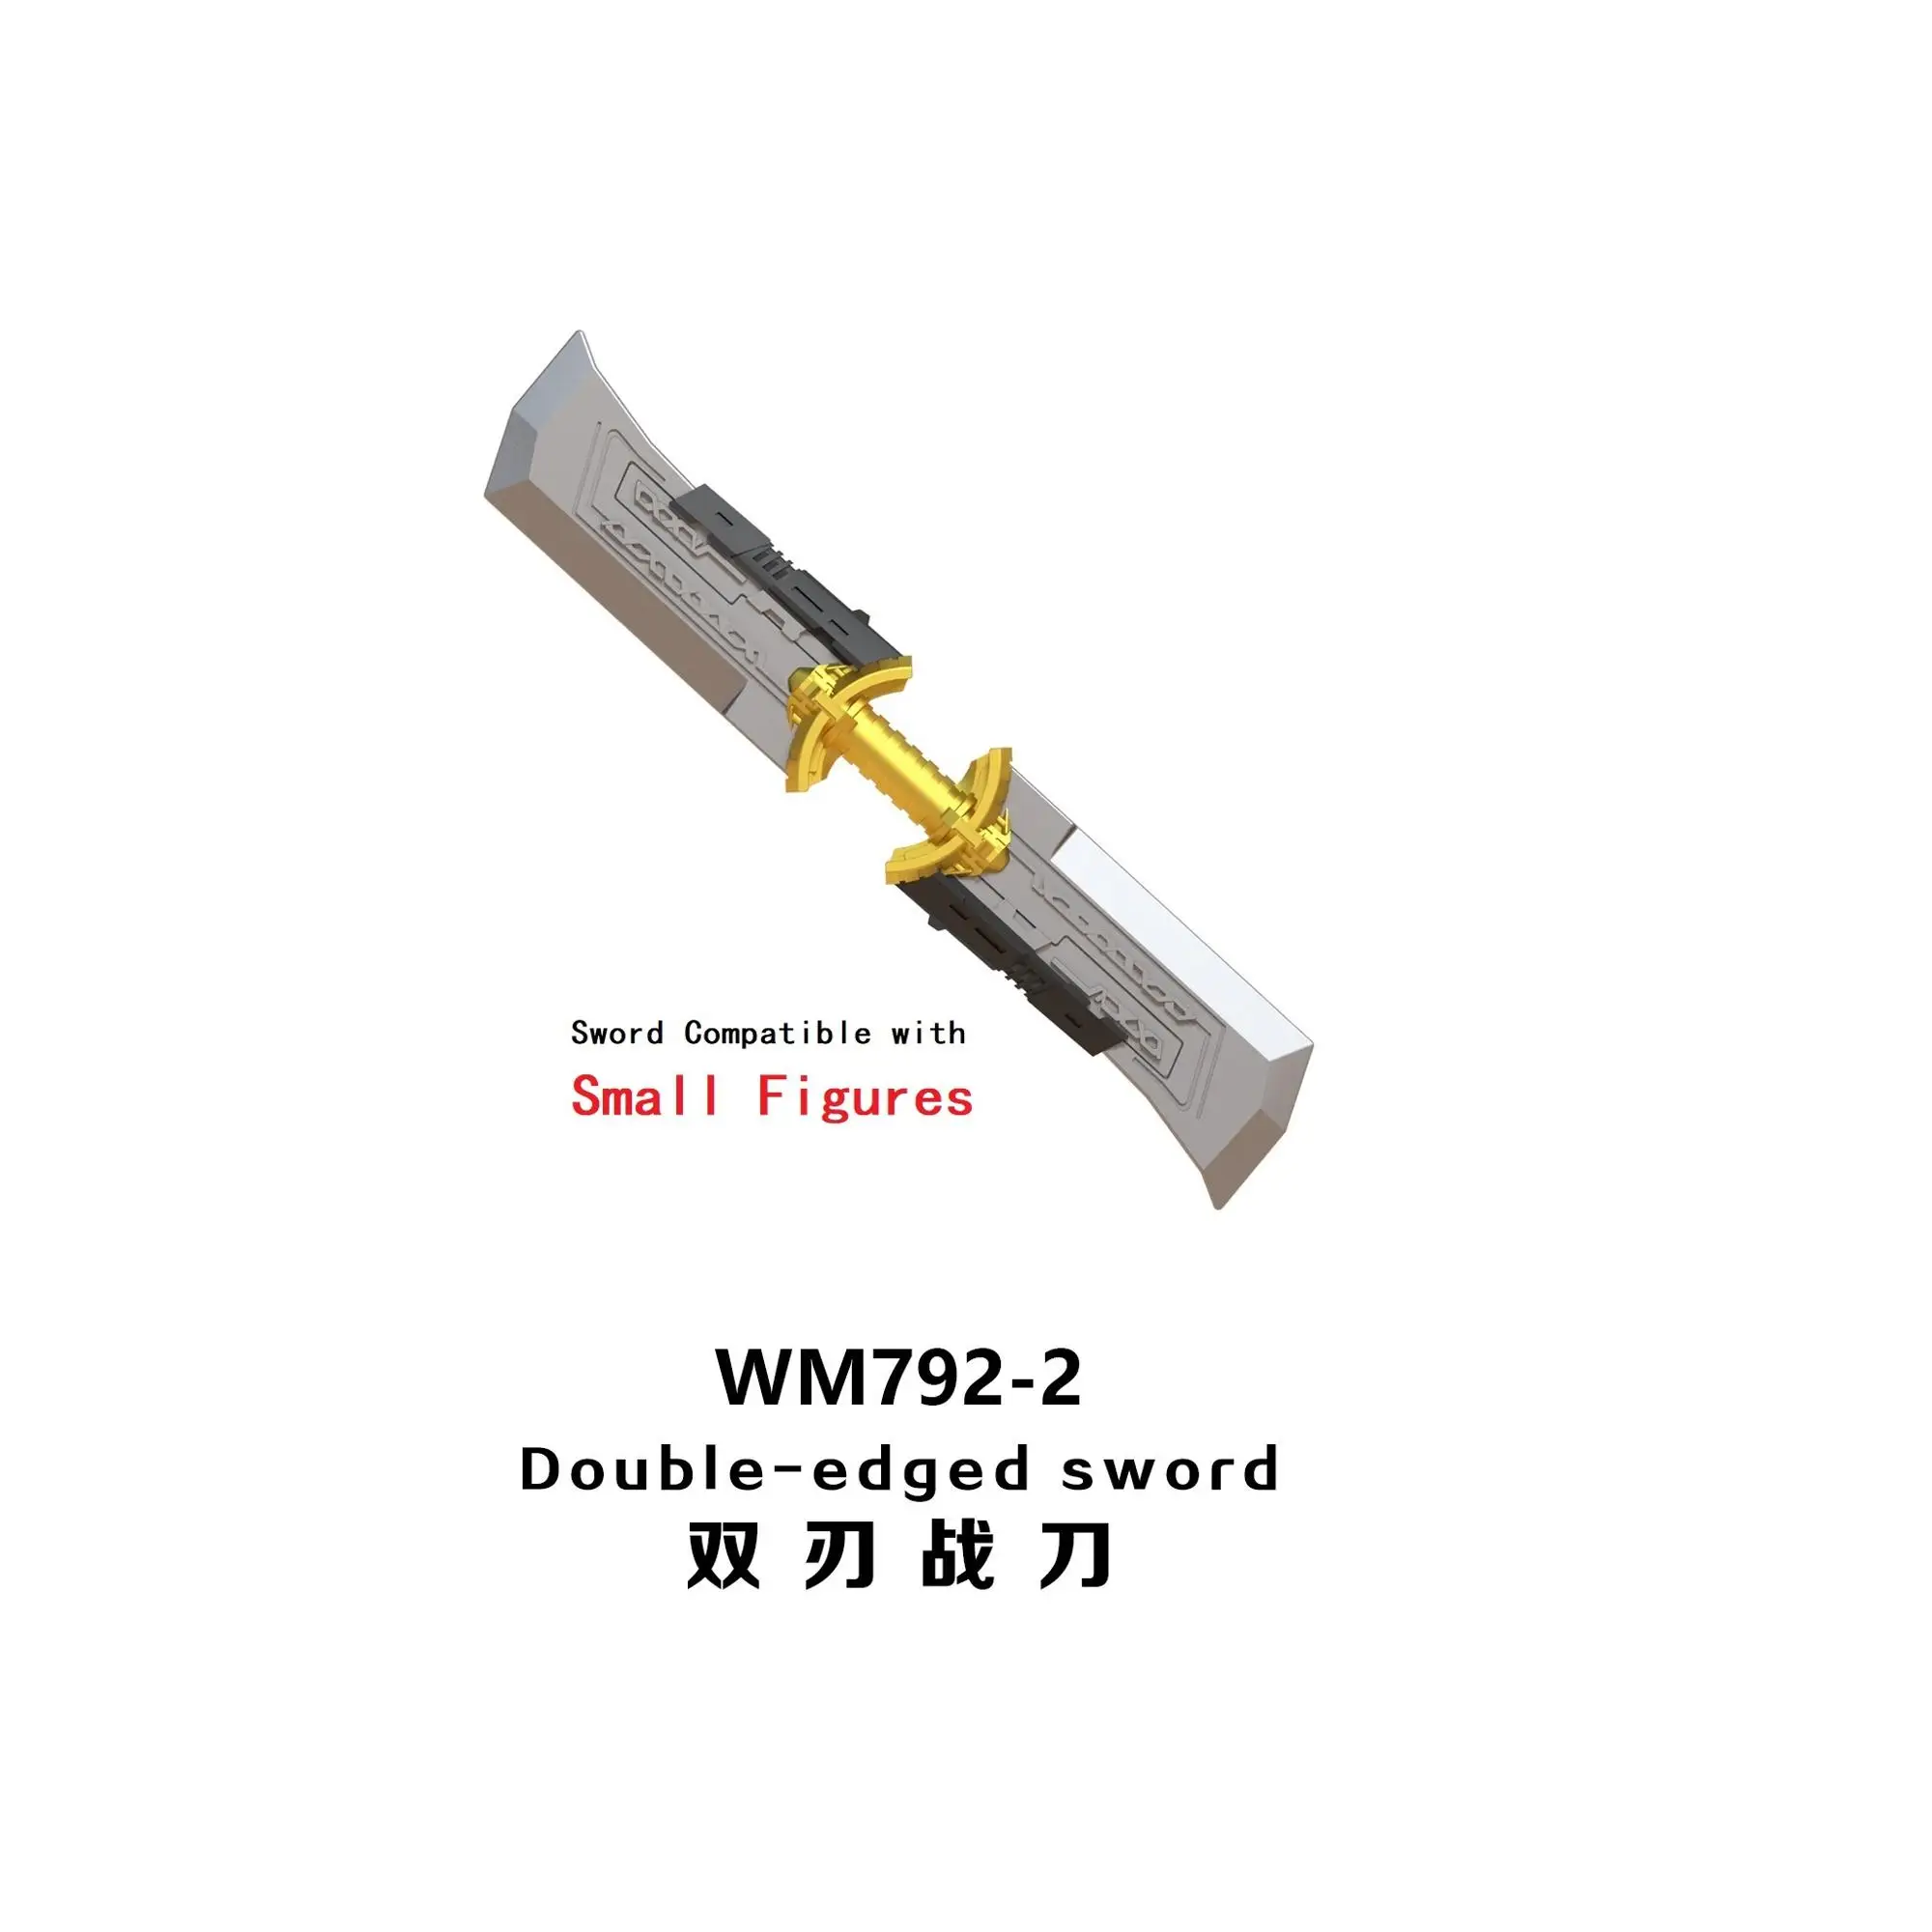 Free Shipping Wm792 2 Double Edged Sword Compatible With Mini Small Figure Endgame Thanos Weapon Accessories Blocks Toys Buy Marvl Mini Figures Endgame Block Figures Product On Alibaba Com